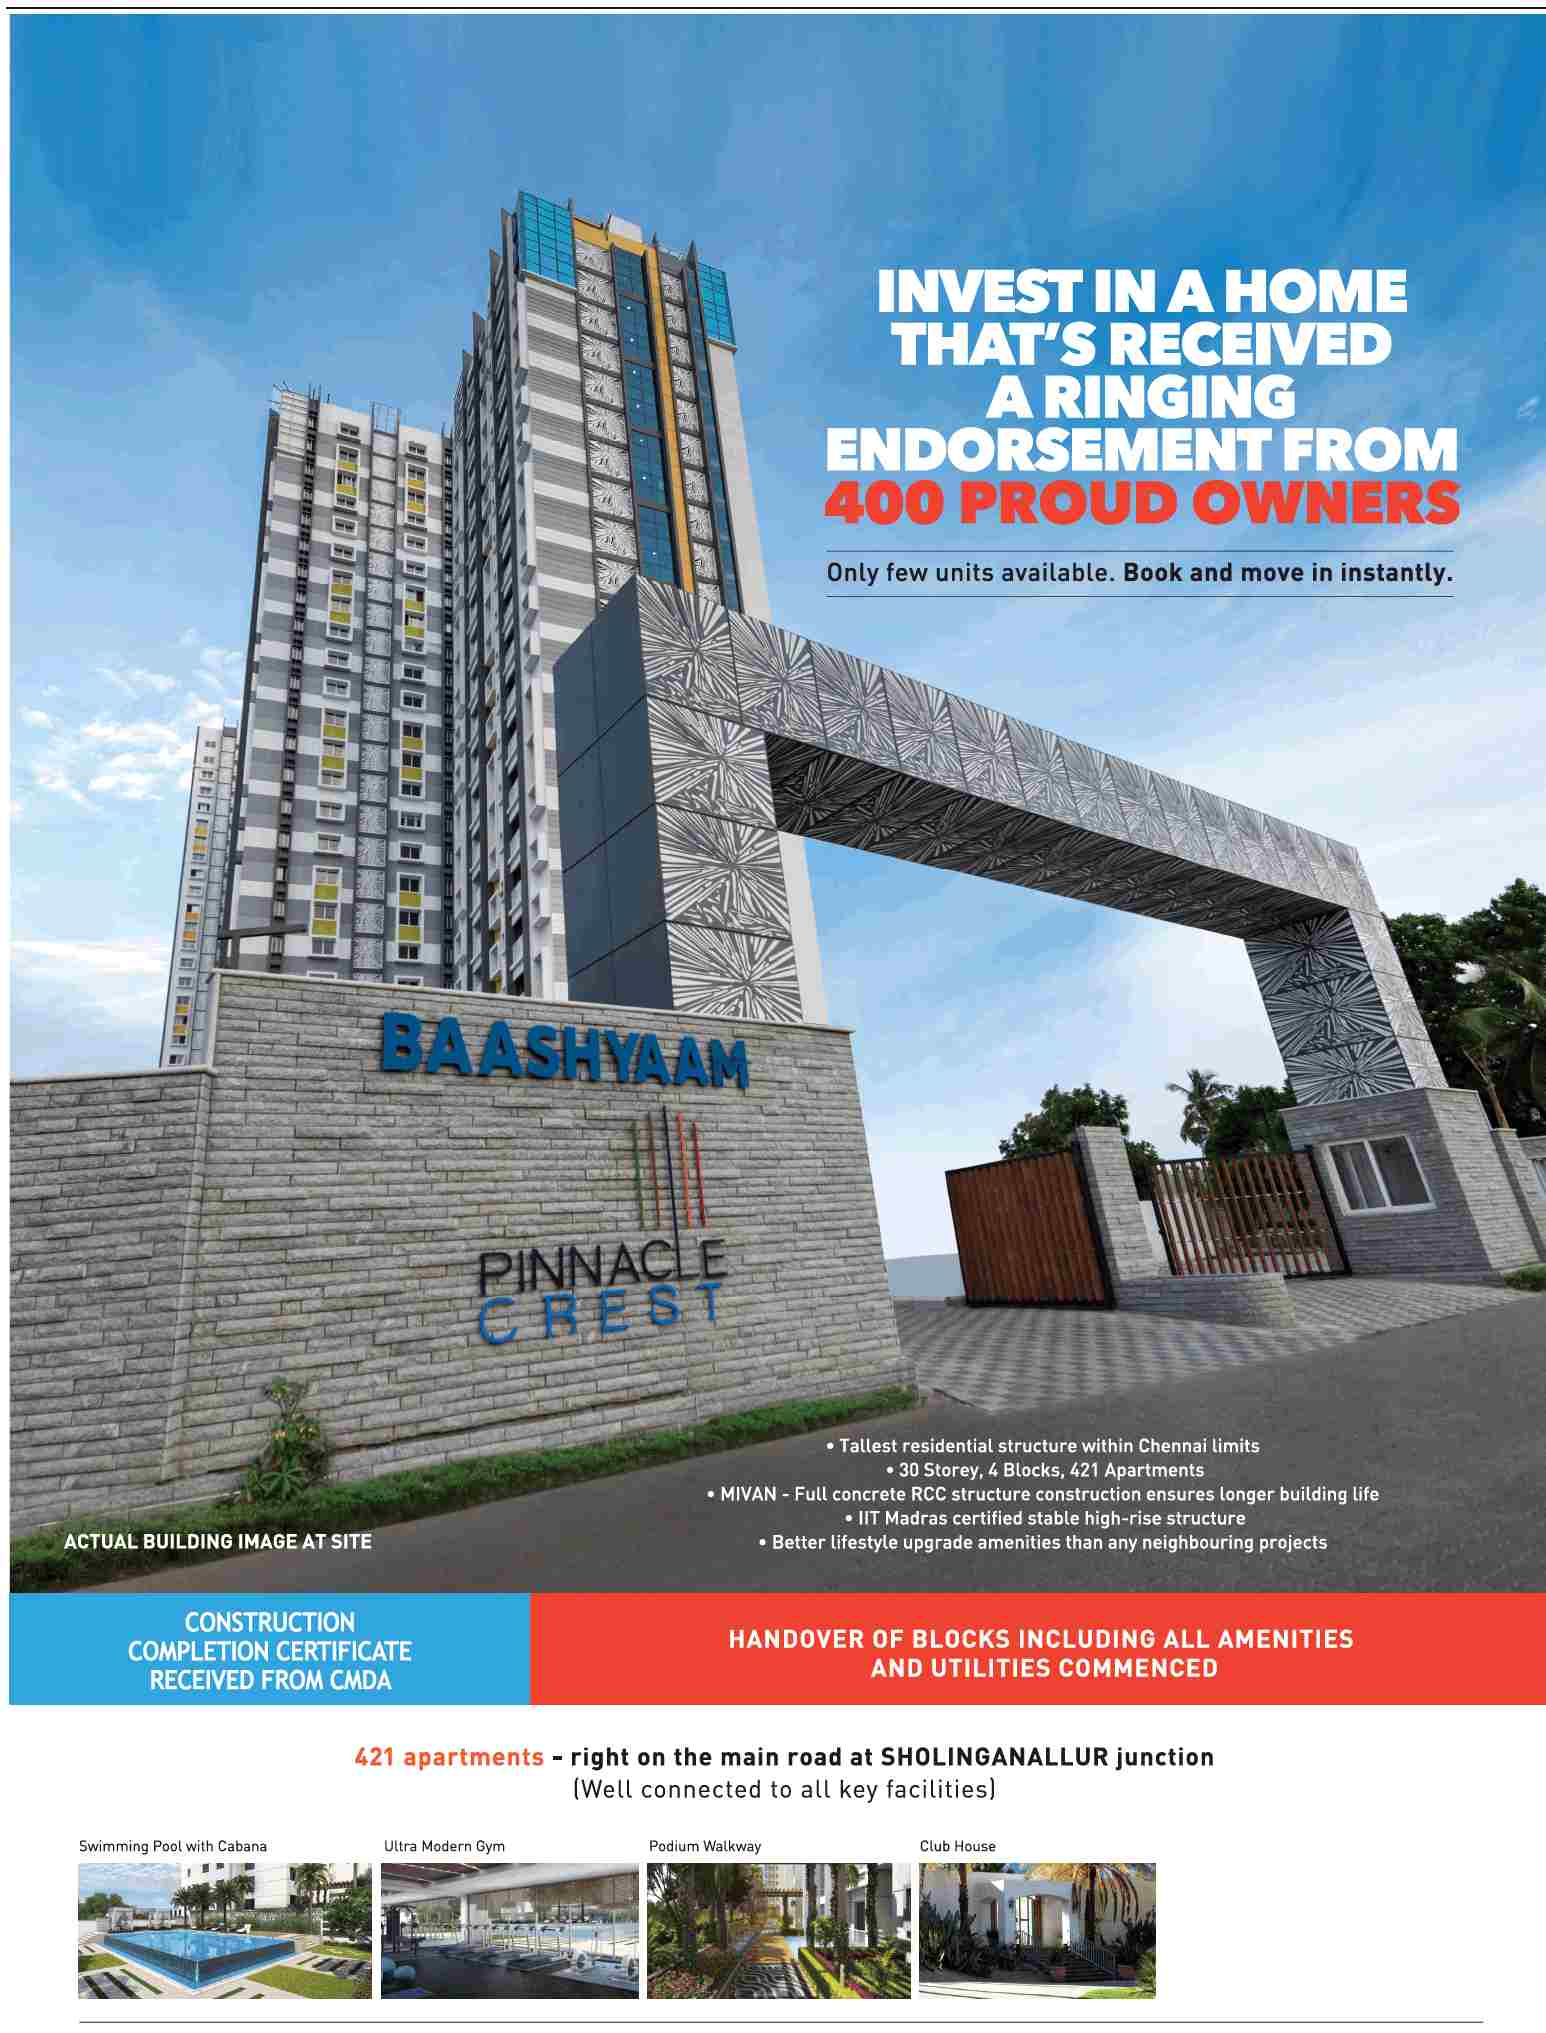 Invest at Baashyaam Pinnacle Crest that received a rising endorsement from 400 proud owners in Chennai Update